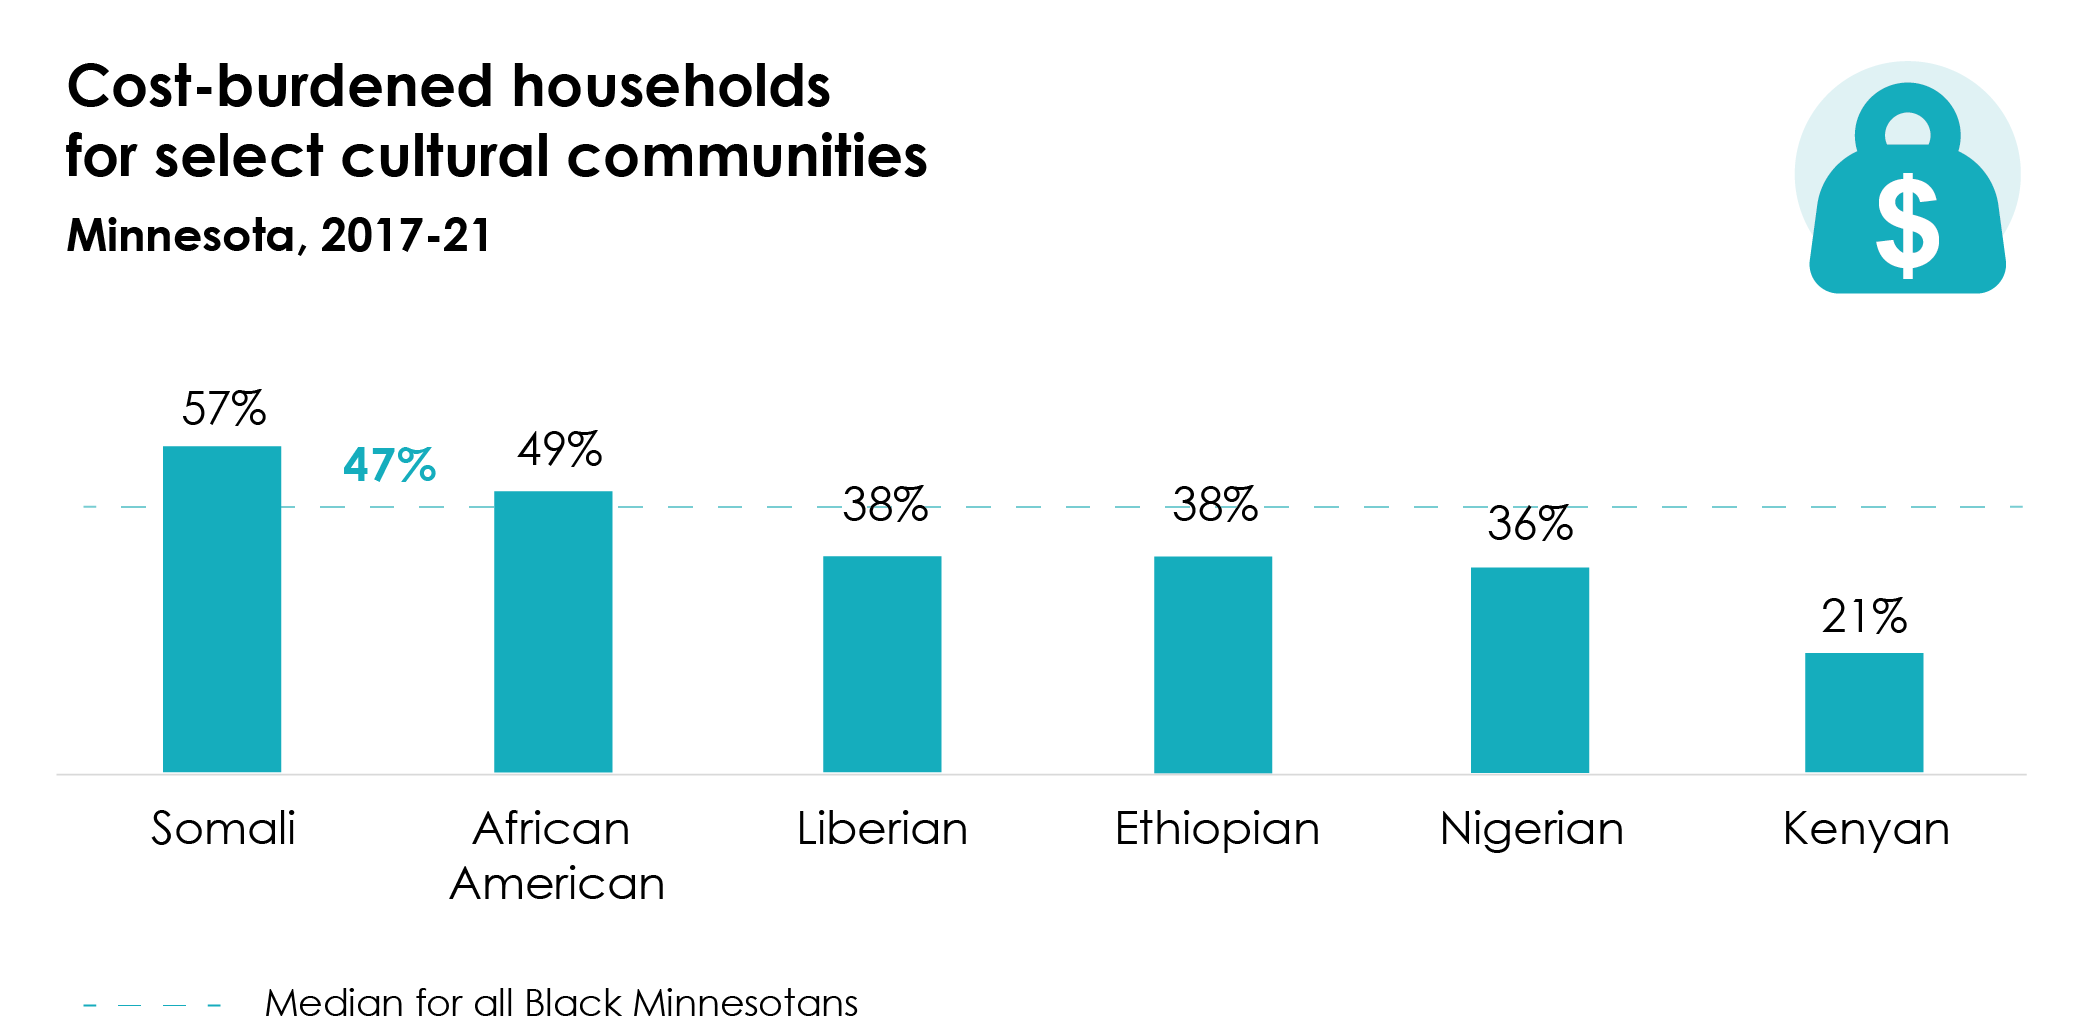 Cost-burdened households for select cultural communities